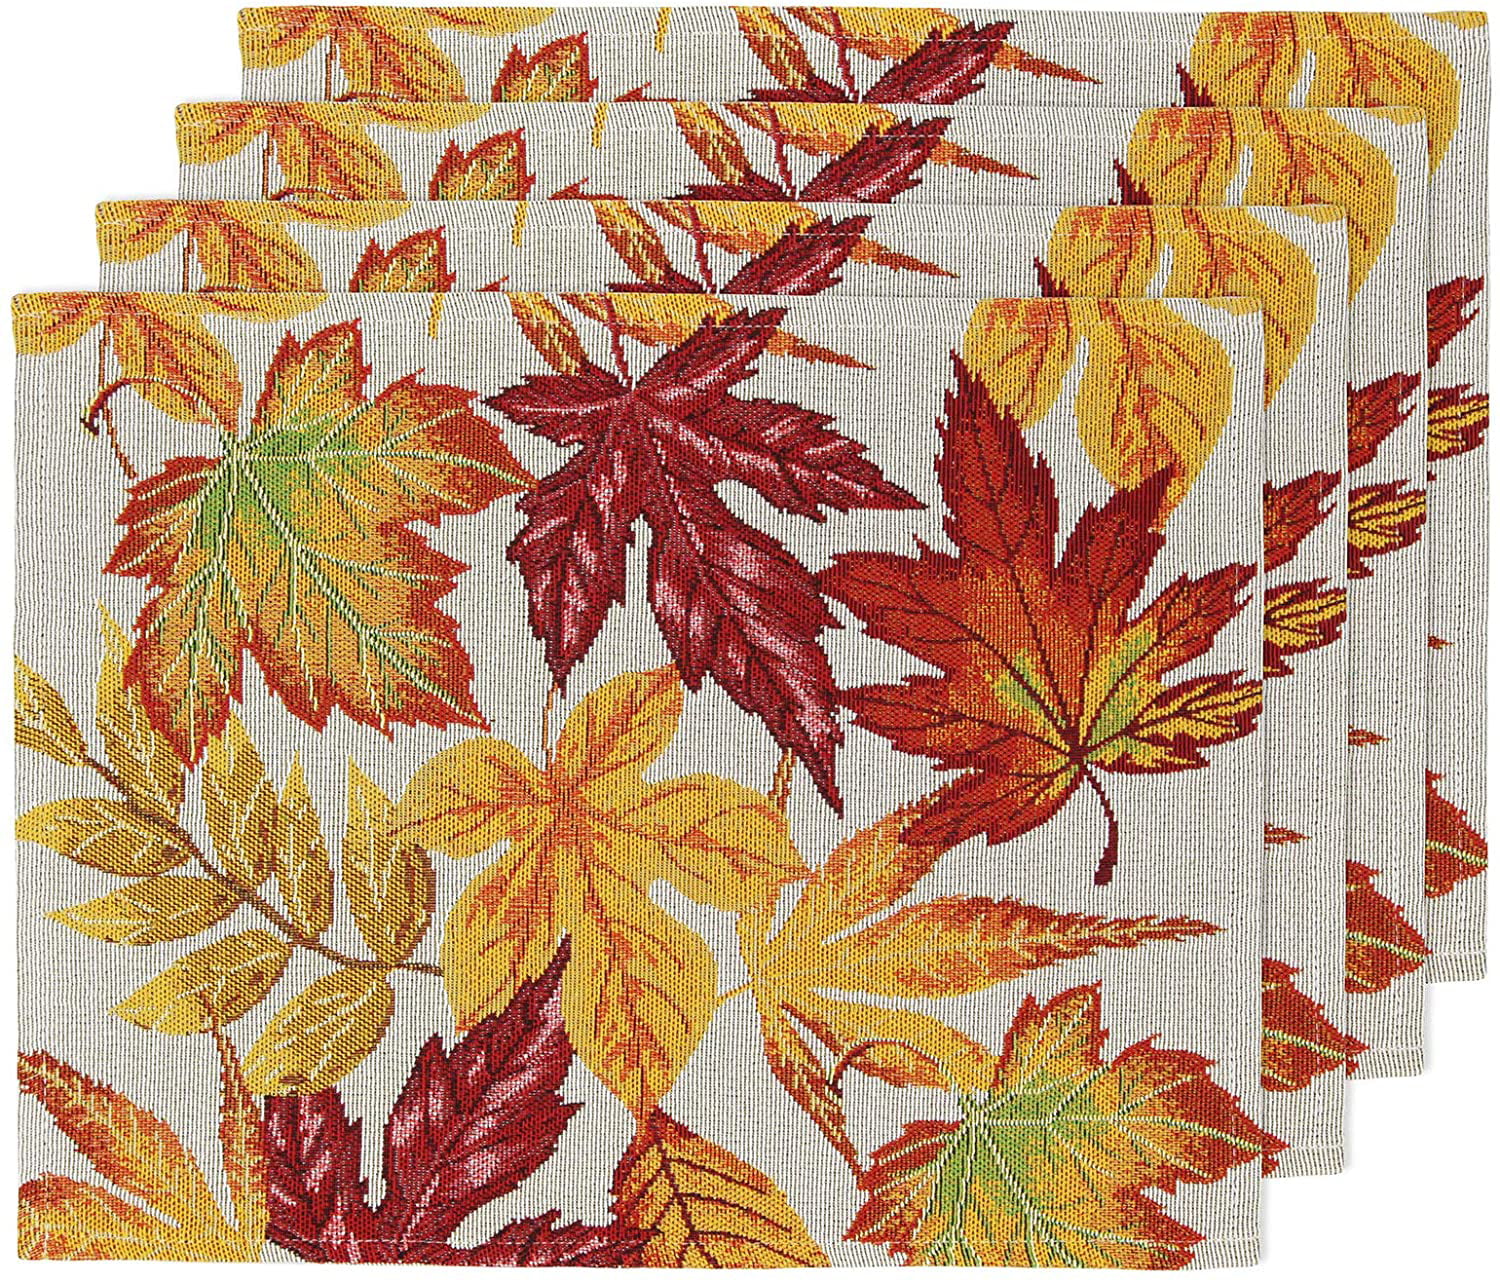 8 Pcs Thanksgiving Fall Placemats Set Waterproof Maple Leaf Table Mats for Dining Room Thanksgiving Decorations Non-Slip Heat Resistant Plaid Dining Mat for Kitchen 12 x 18 Inch Wedding Party